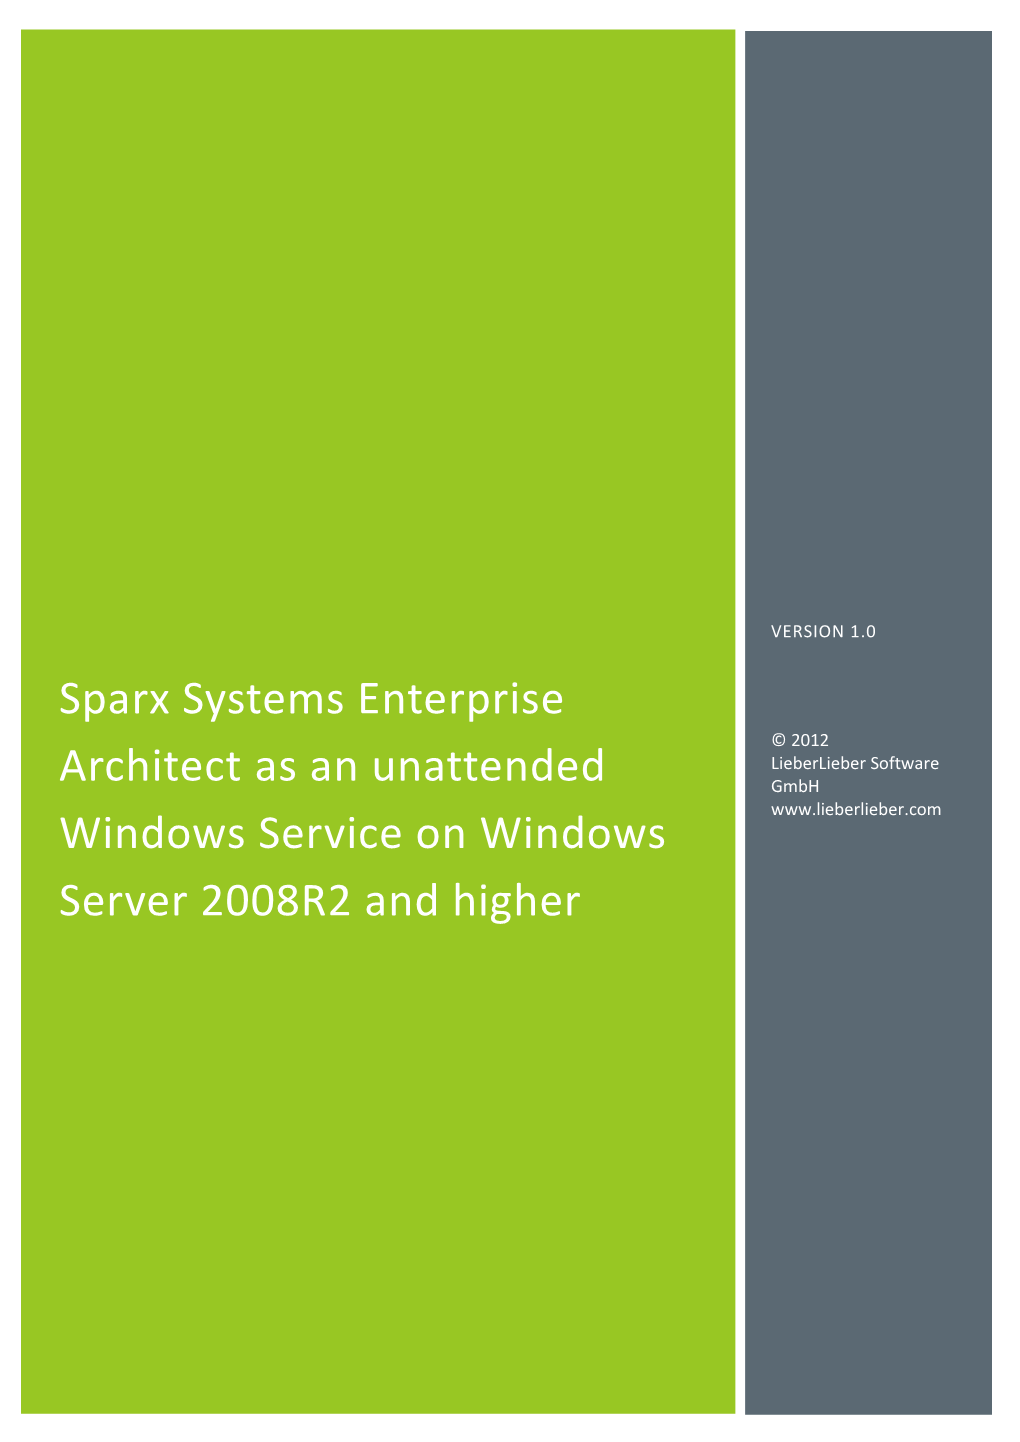 Sparx Systems Enterprise Architect As an Unattended Windows Service on 1 Windows Server 2008R2 and Higher